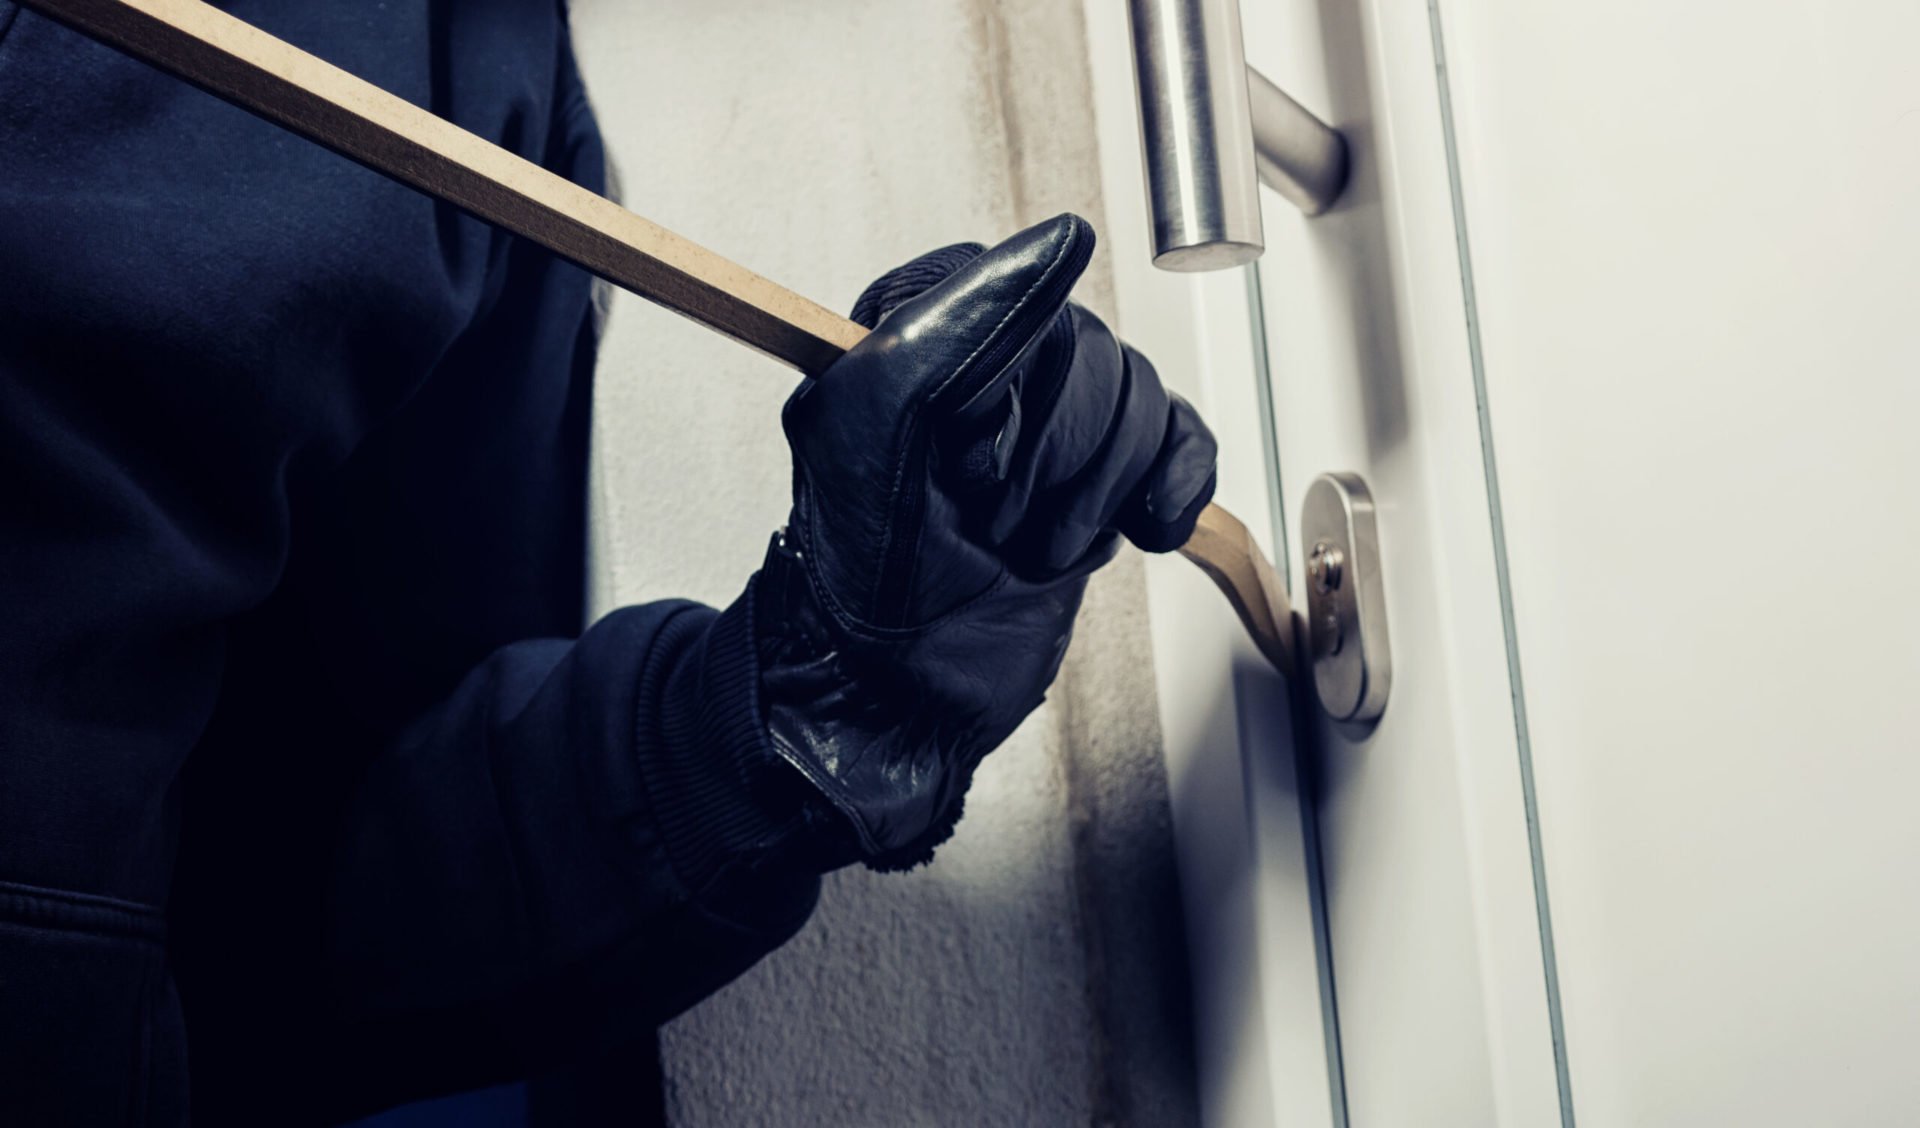 Dealing with Burglary as a Property Manager